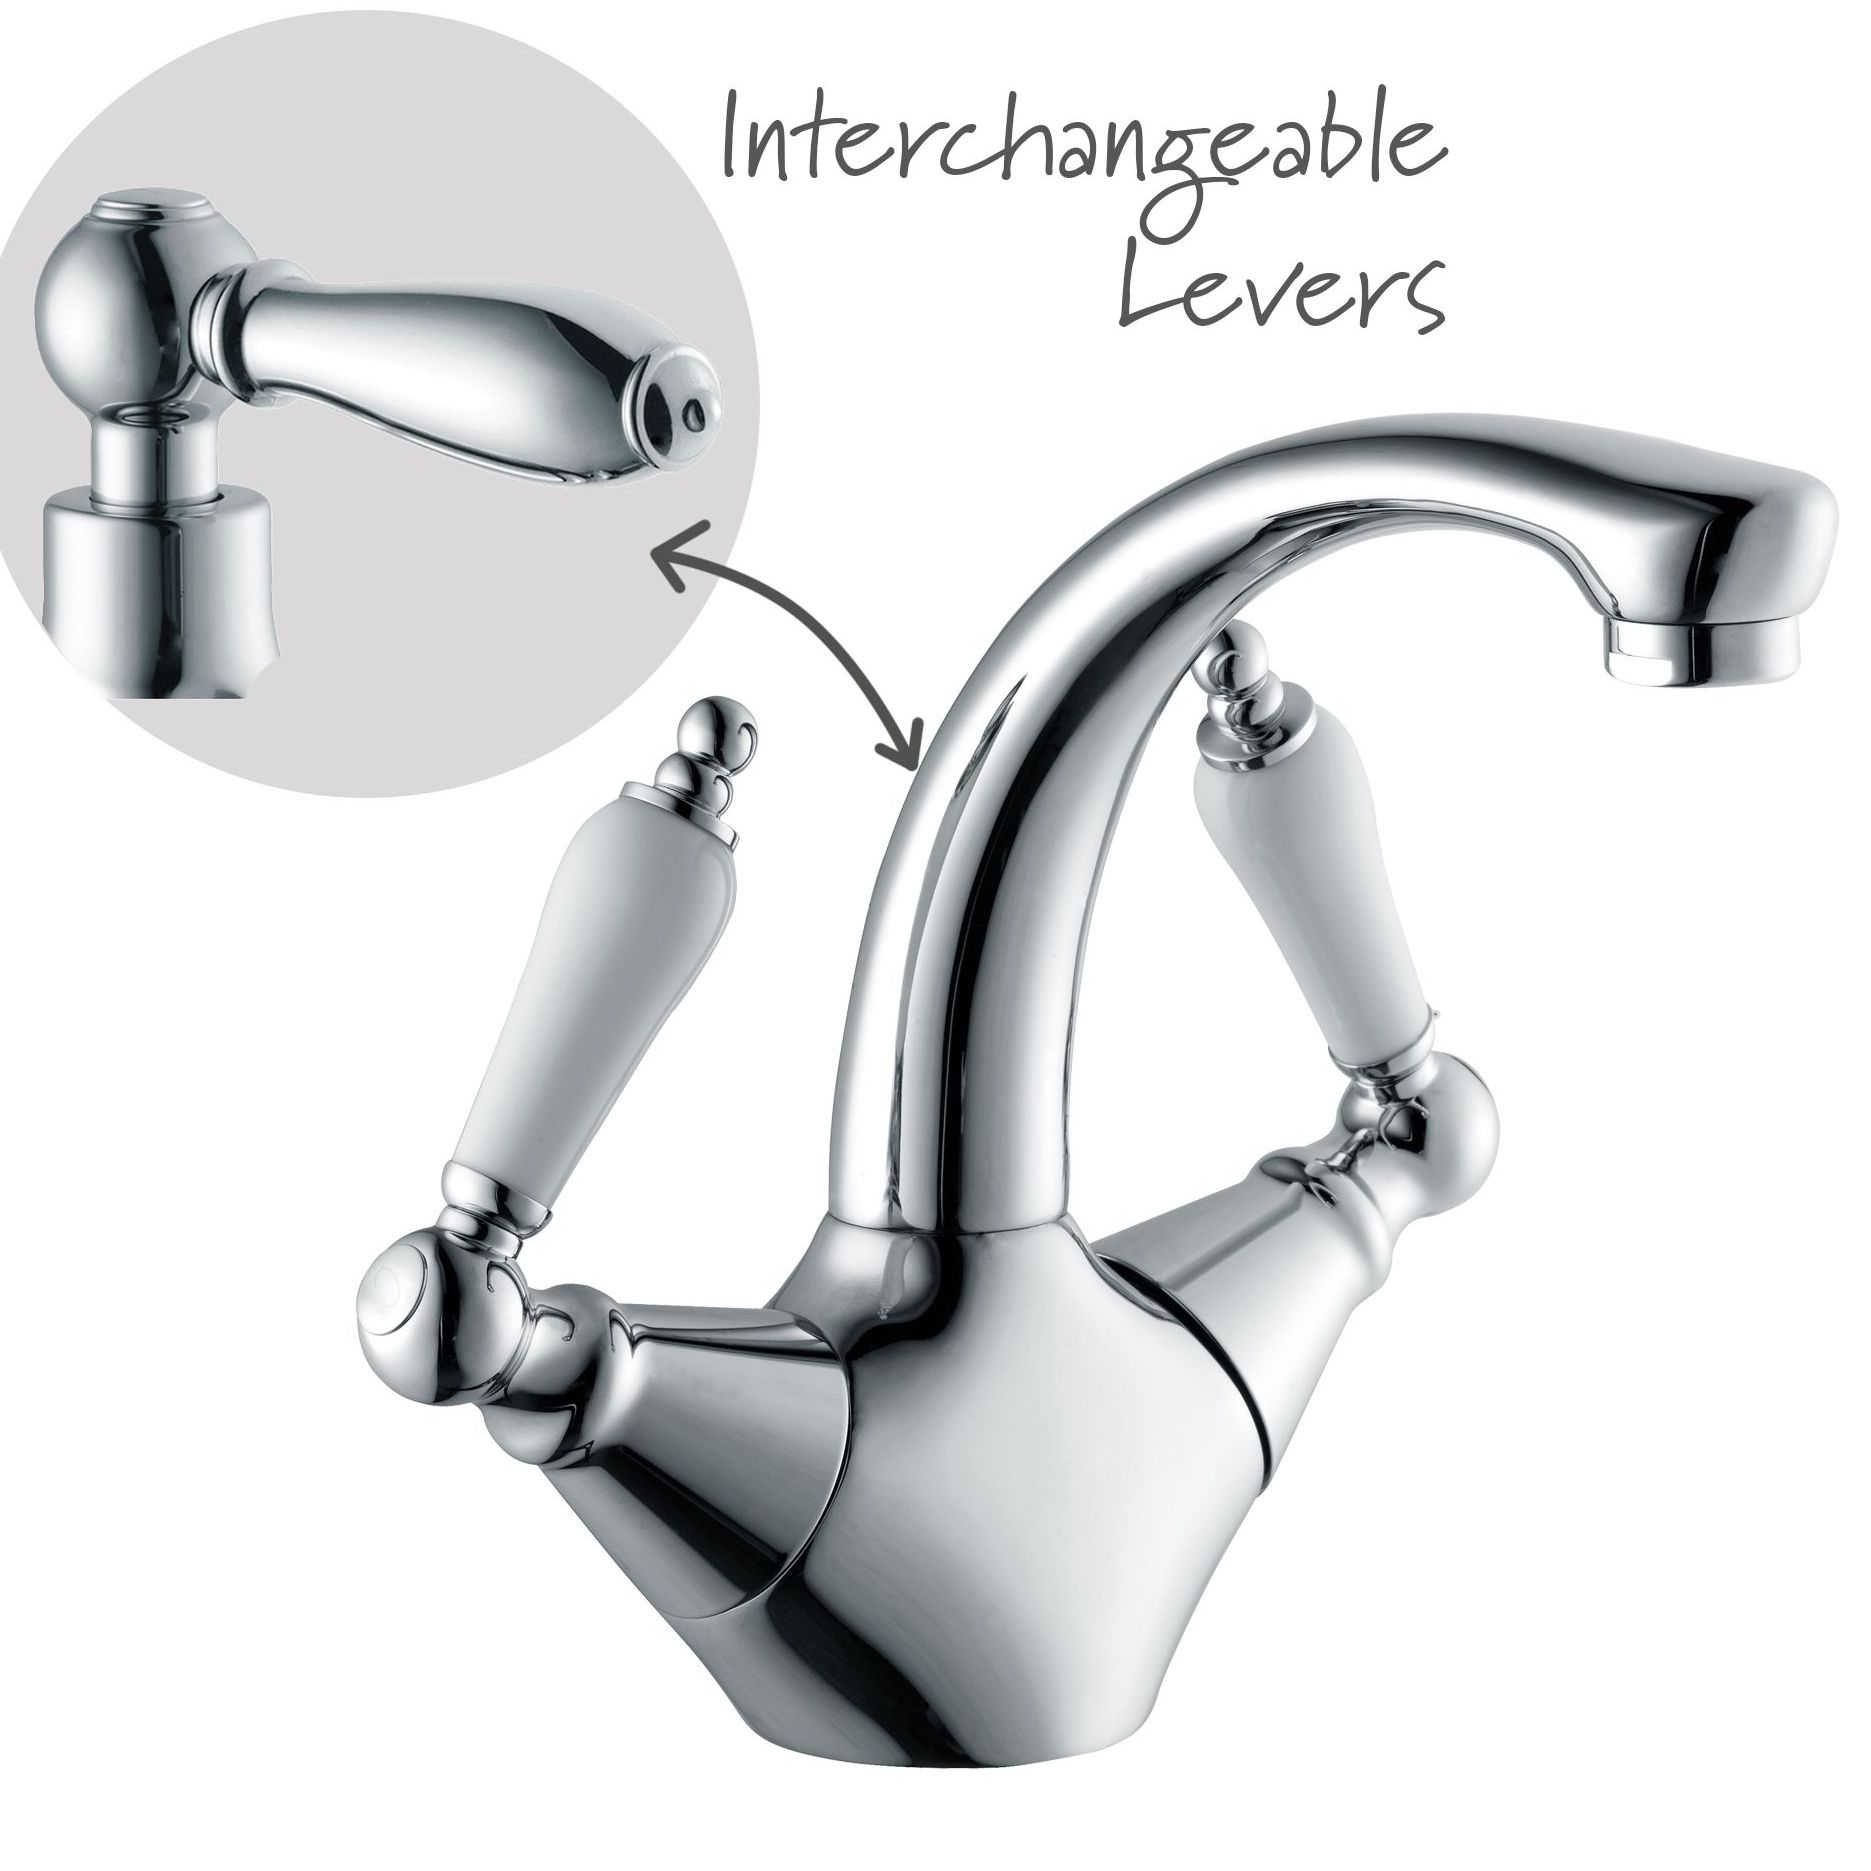 Cooke Lewis Timeless 2 Lever Basin Mixer Tap~04067641 01c?$MOB PREV$&$width=768&$height=768